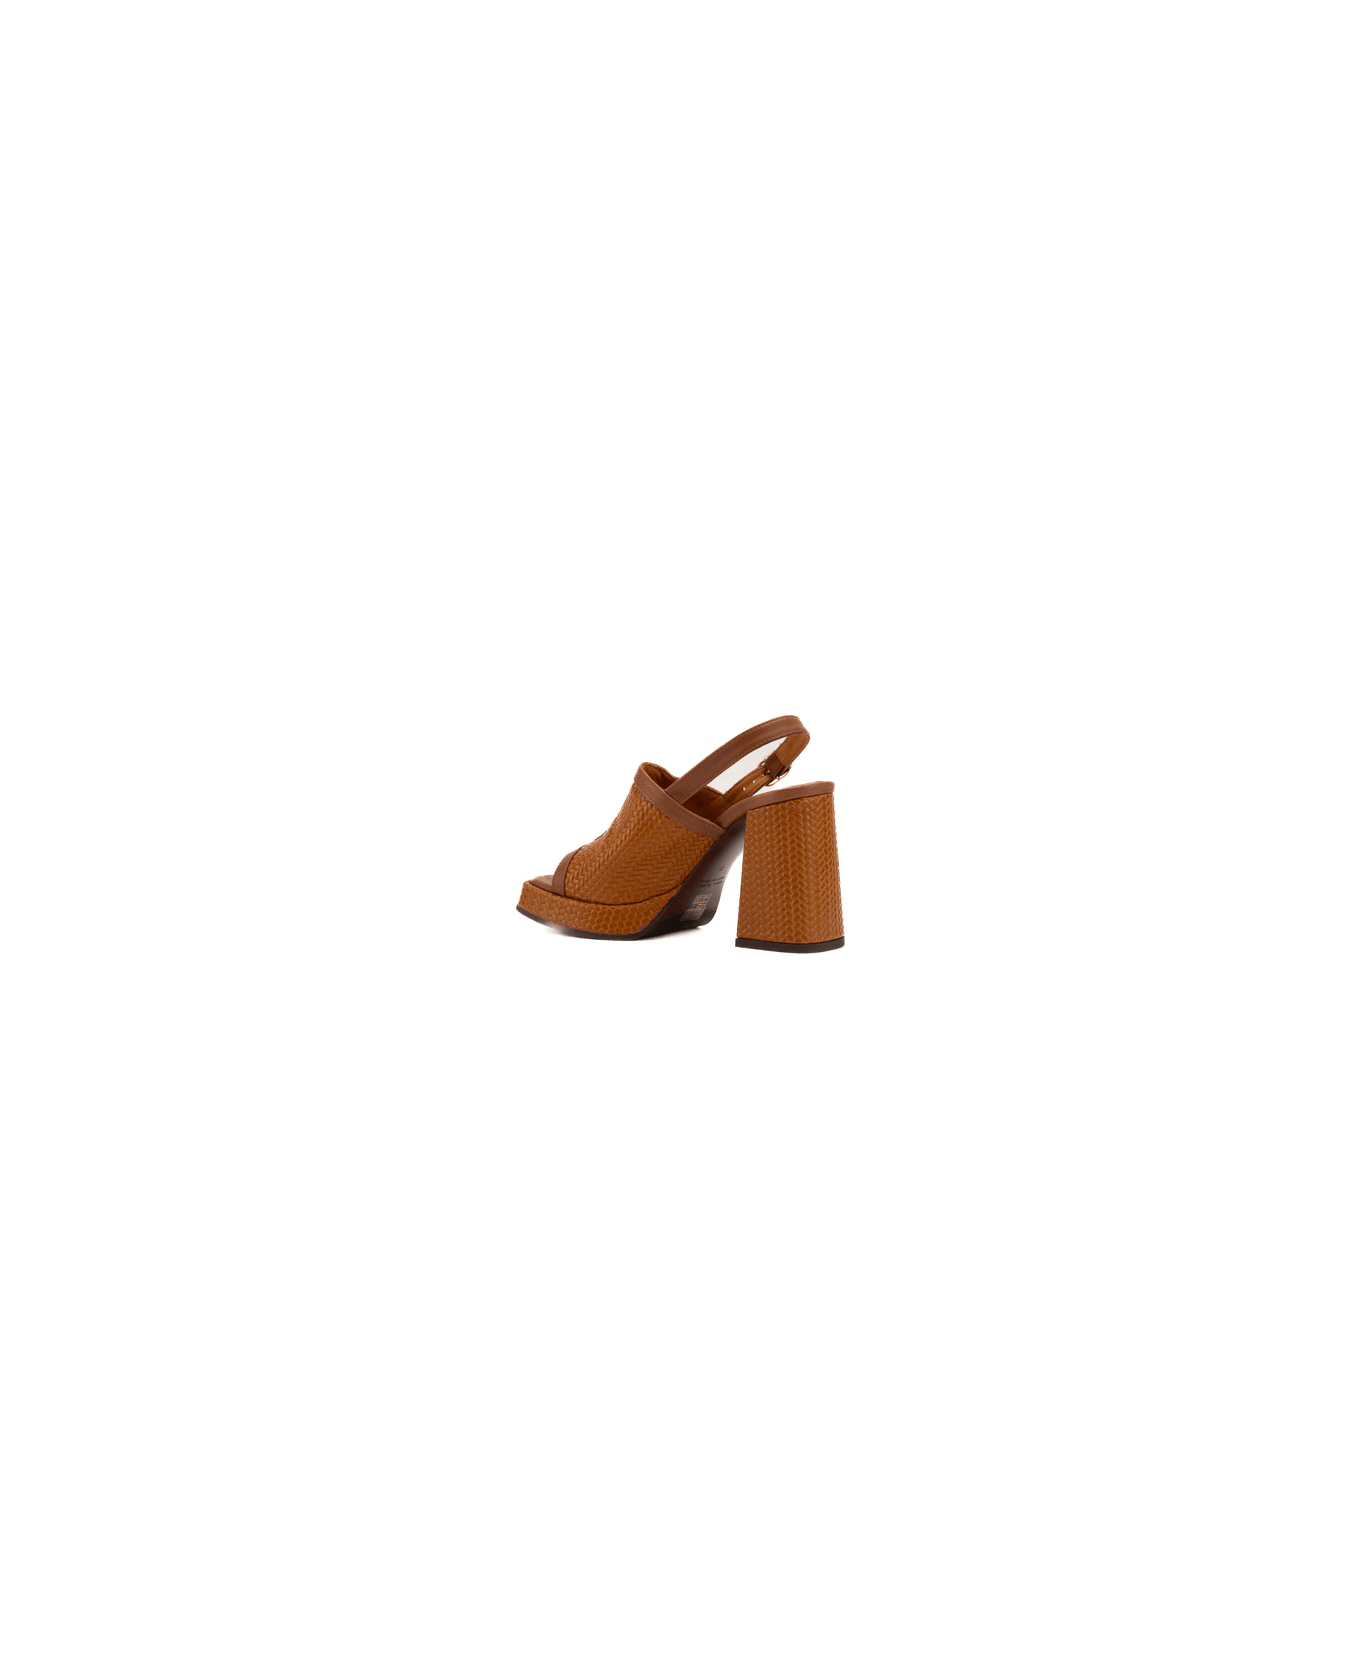 Chie Mihara Zimi Sandals In Woven Effect Leather - Cognac